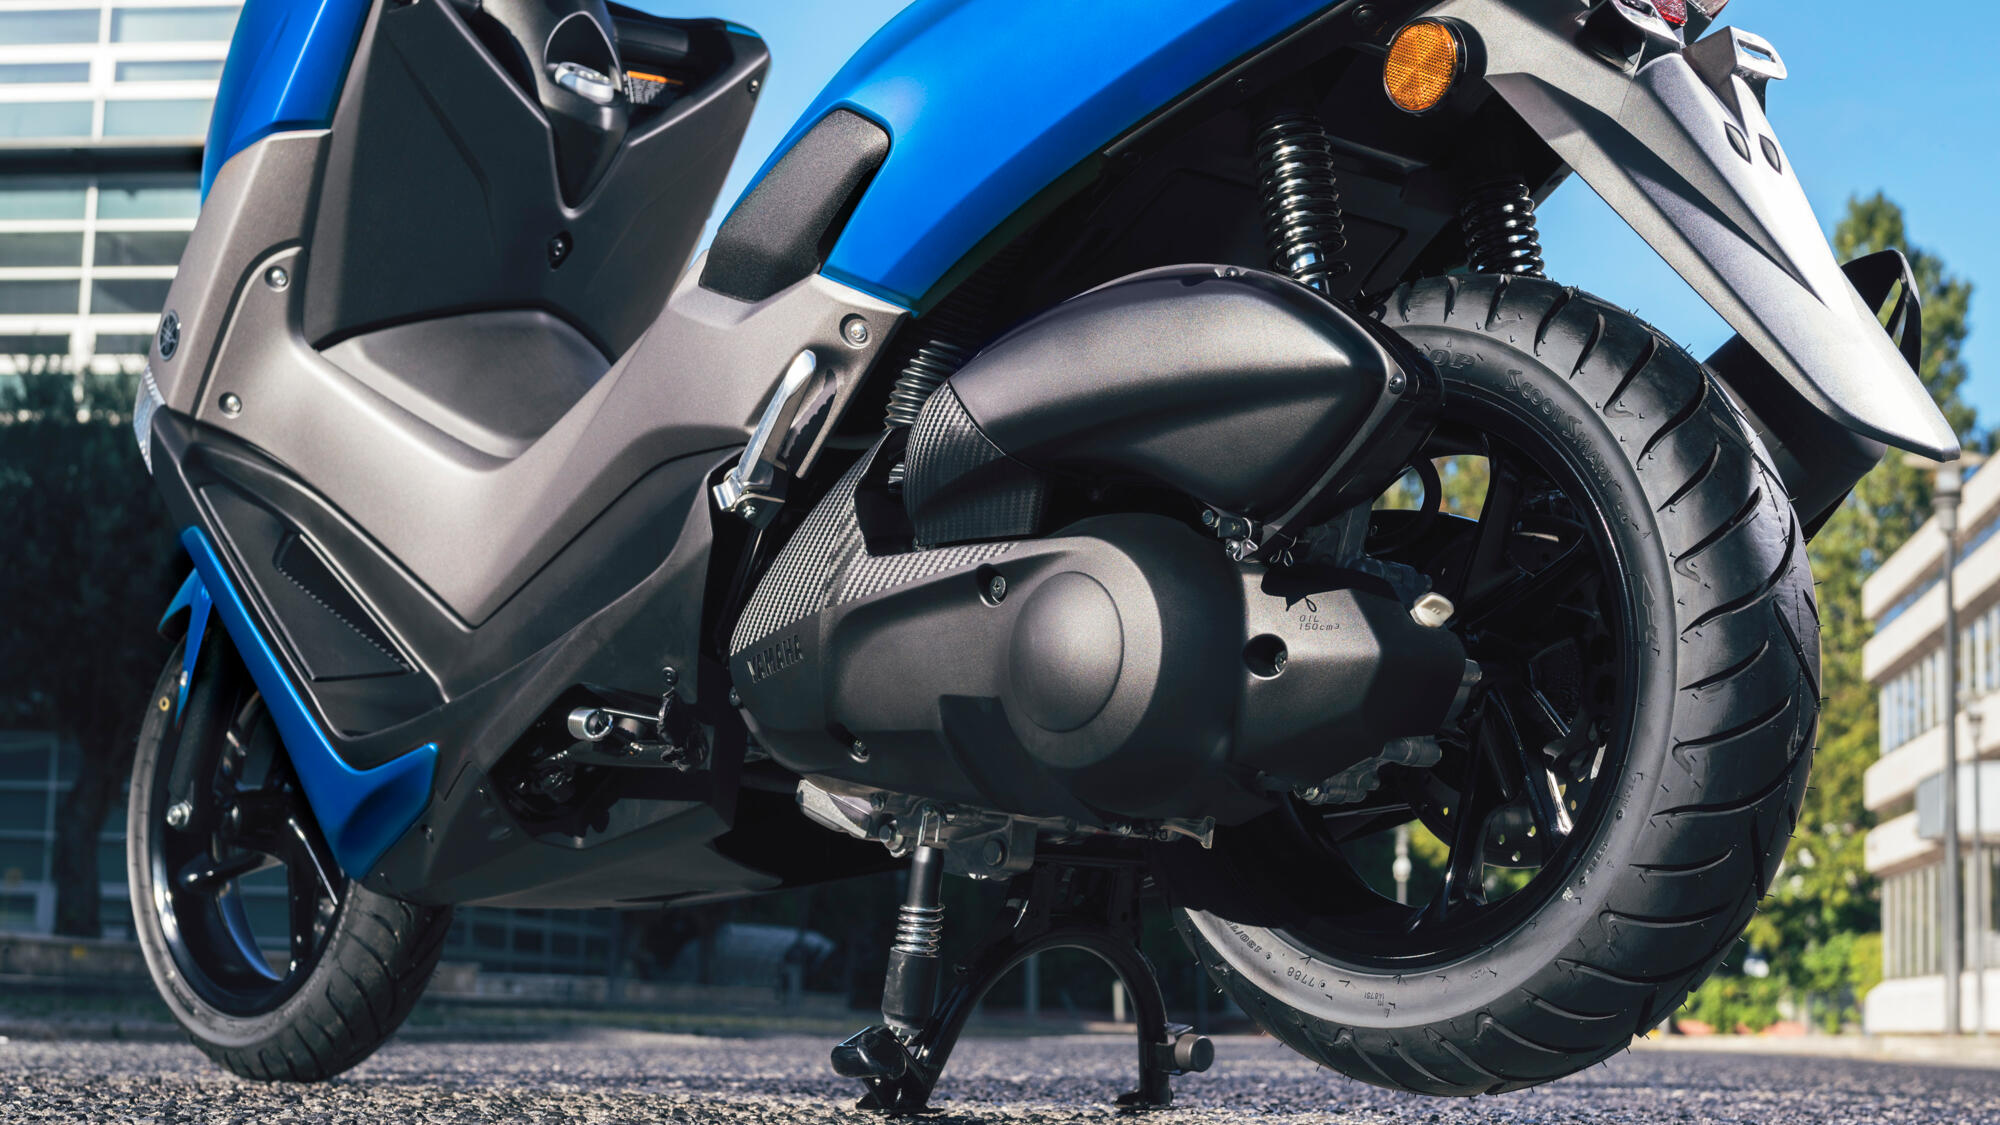 Yamaha NMAX 155 - Features and Technical Specifications